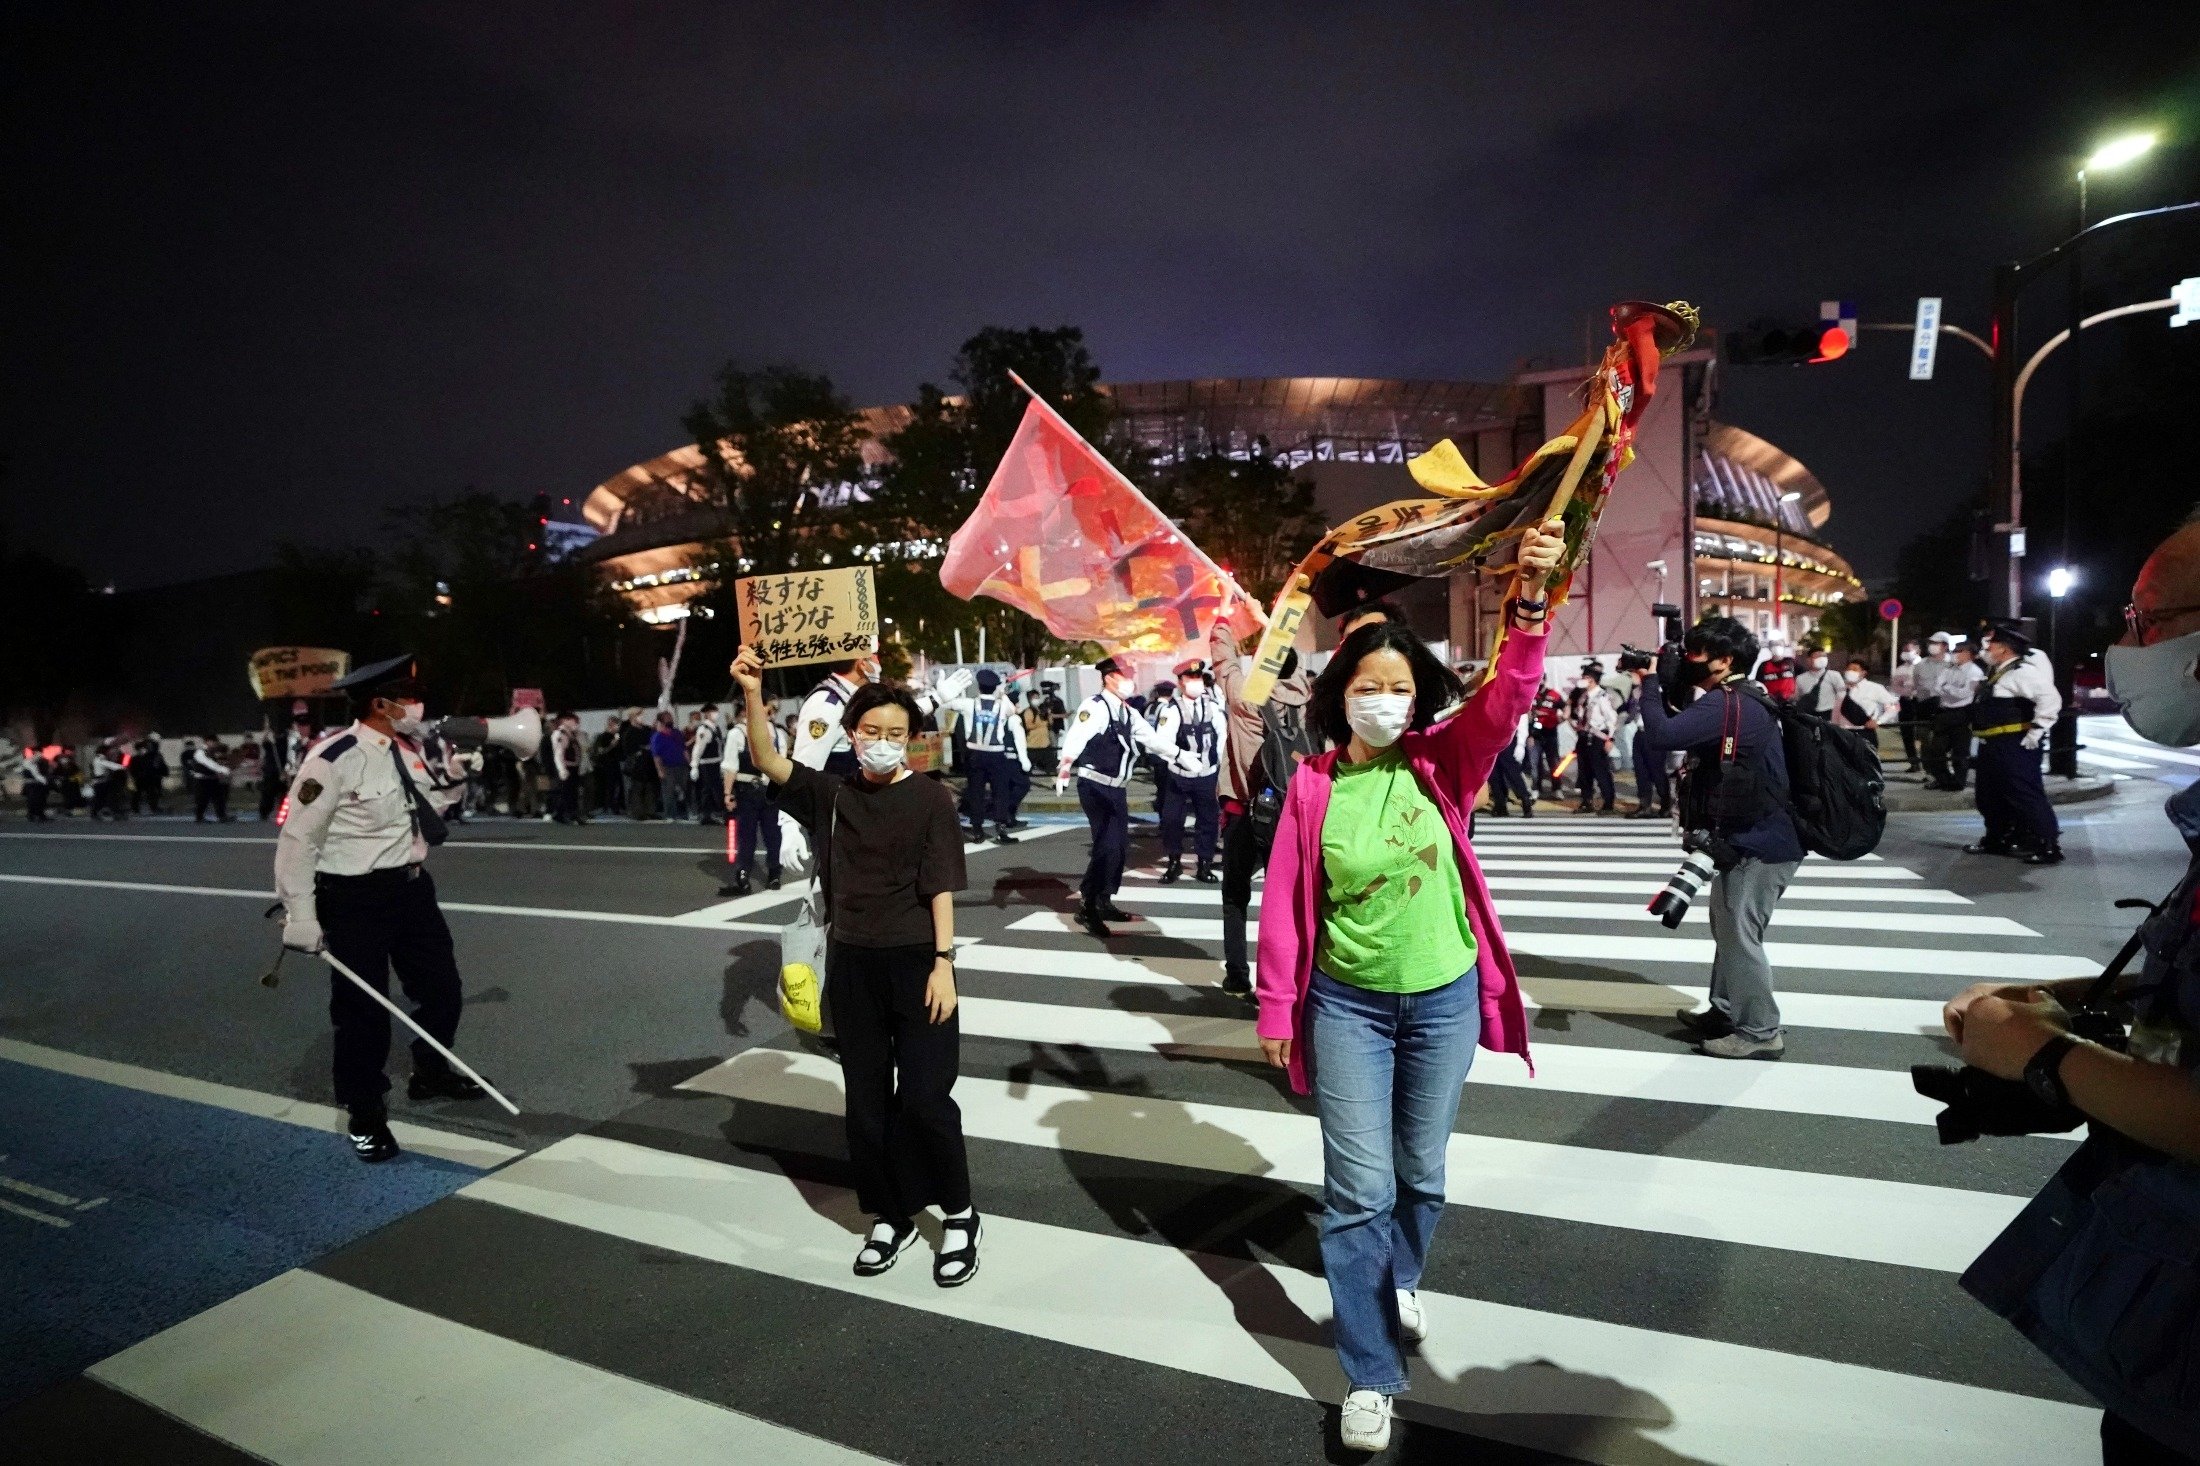 People against the Tokyo 2020 Olympics set to open in July, march to protest around Tokyo's National Stadium during an anti-Olympics demonstration, Tokyo, Japan, May 9, 2021. (AP Photo)